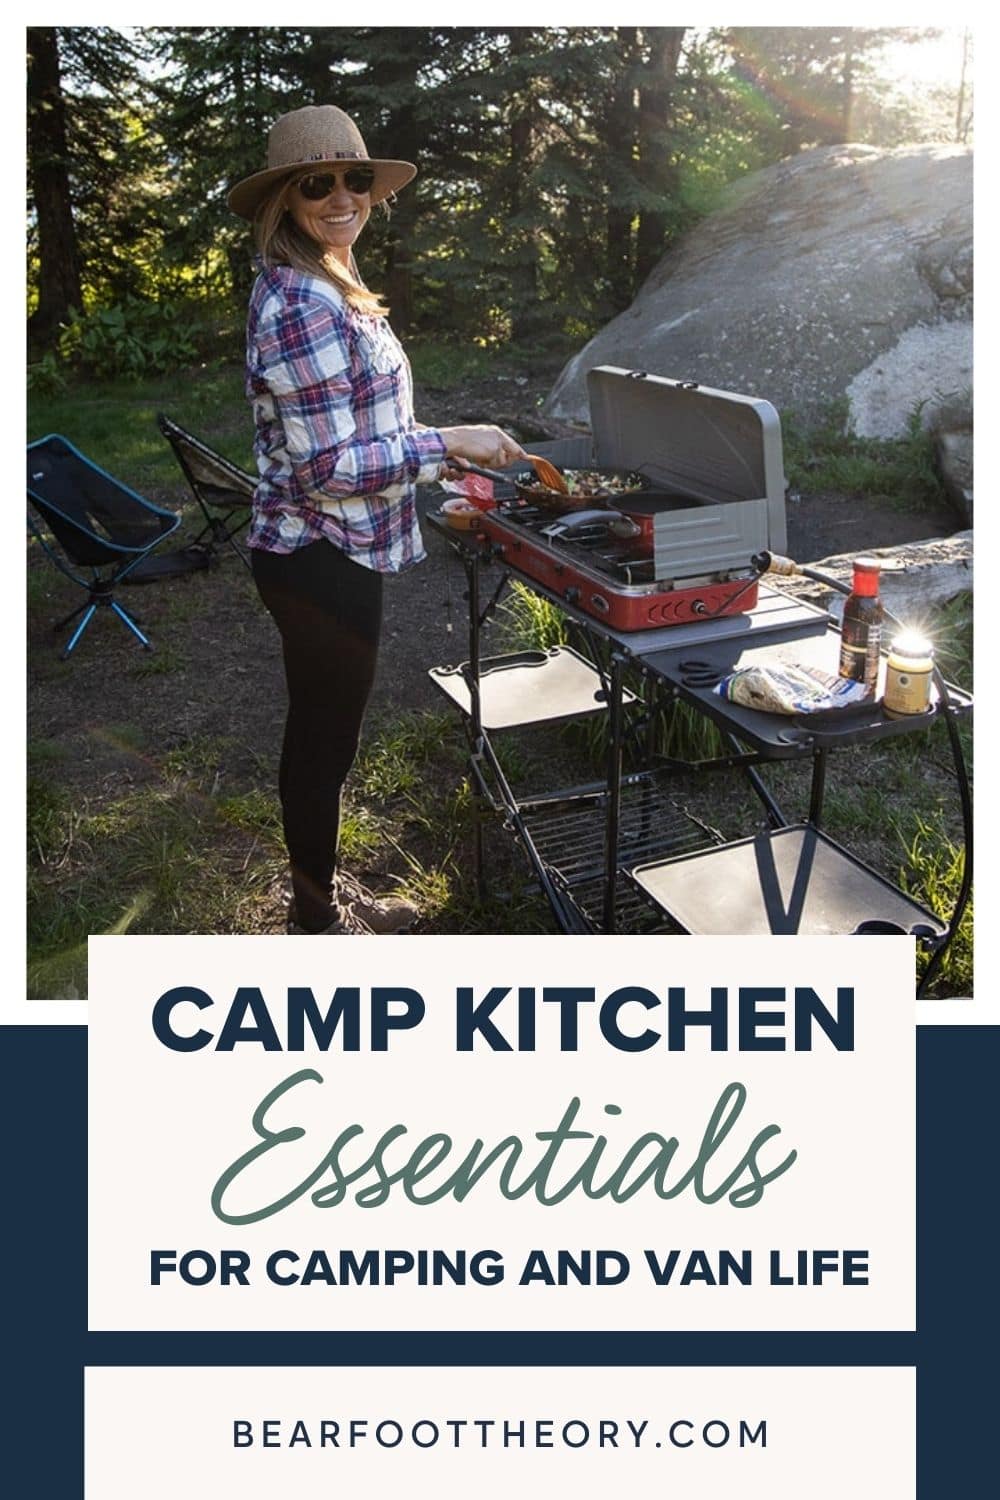 Looking to upgrade your camp cooking gear for car camping or van life? Here is our checklist for the best outdoor camp kitchen essentials.